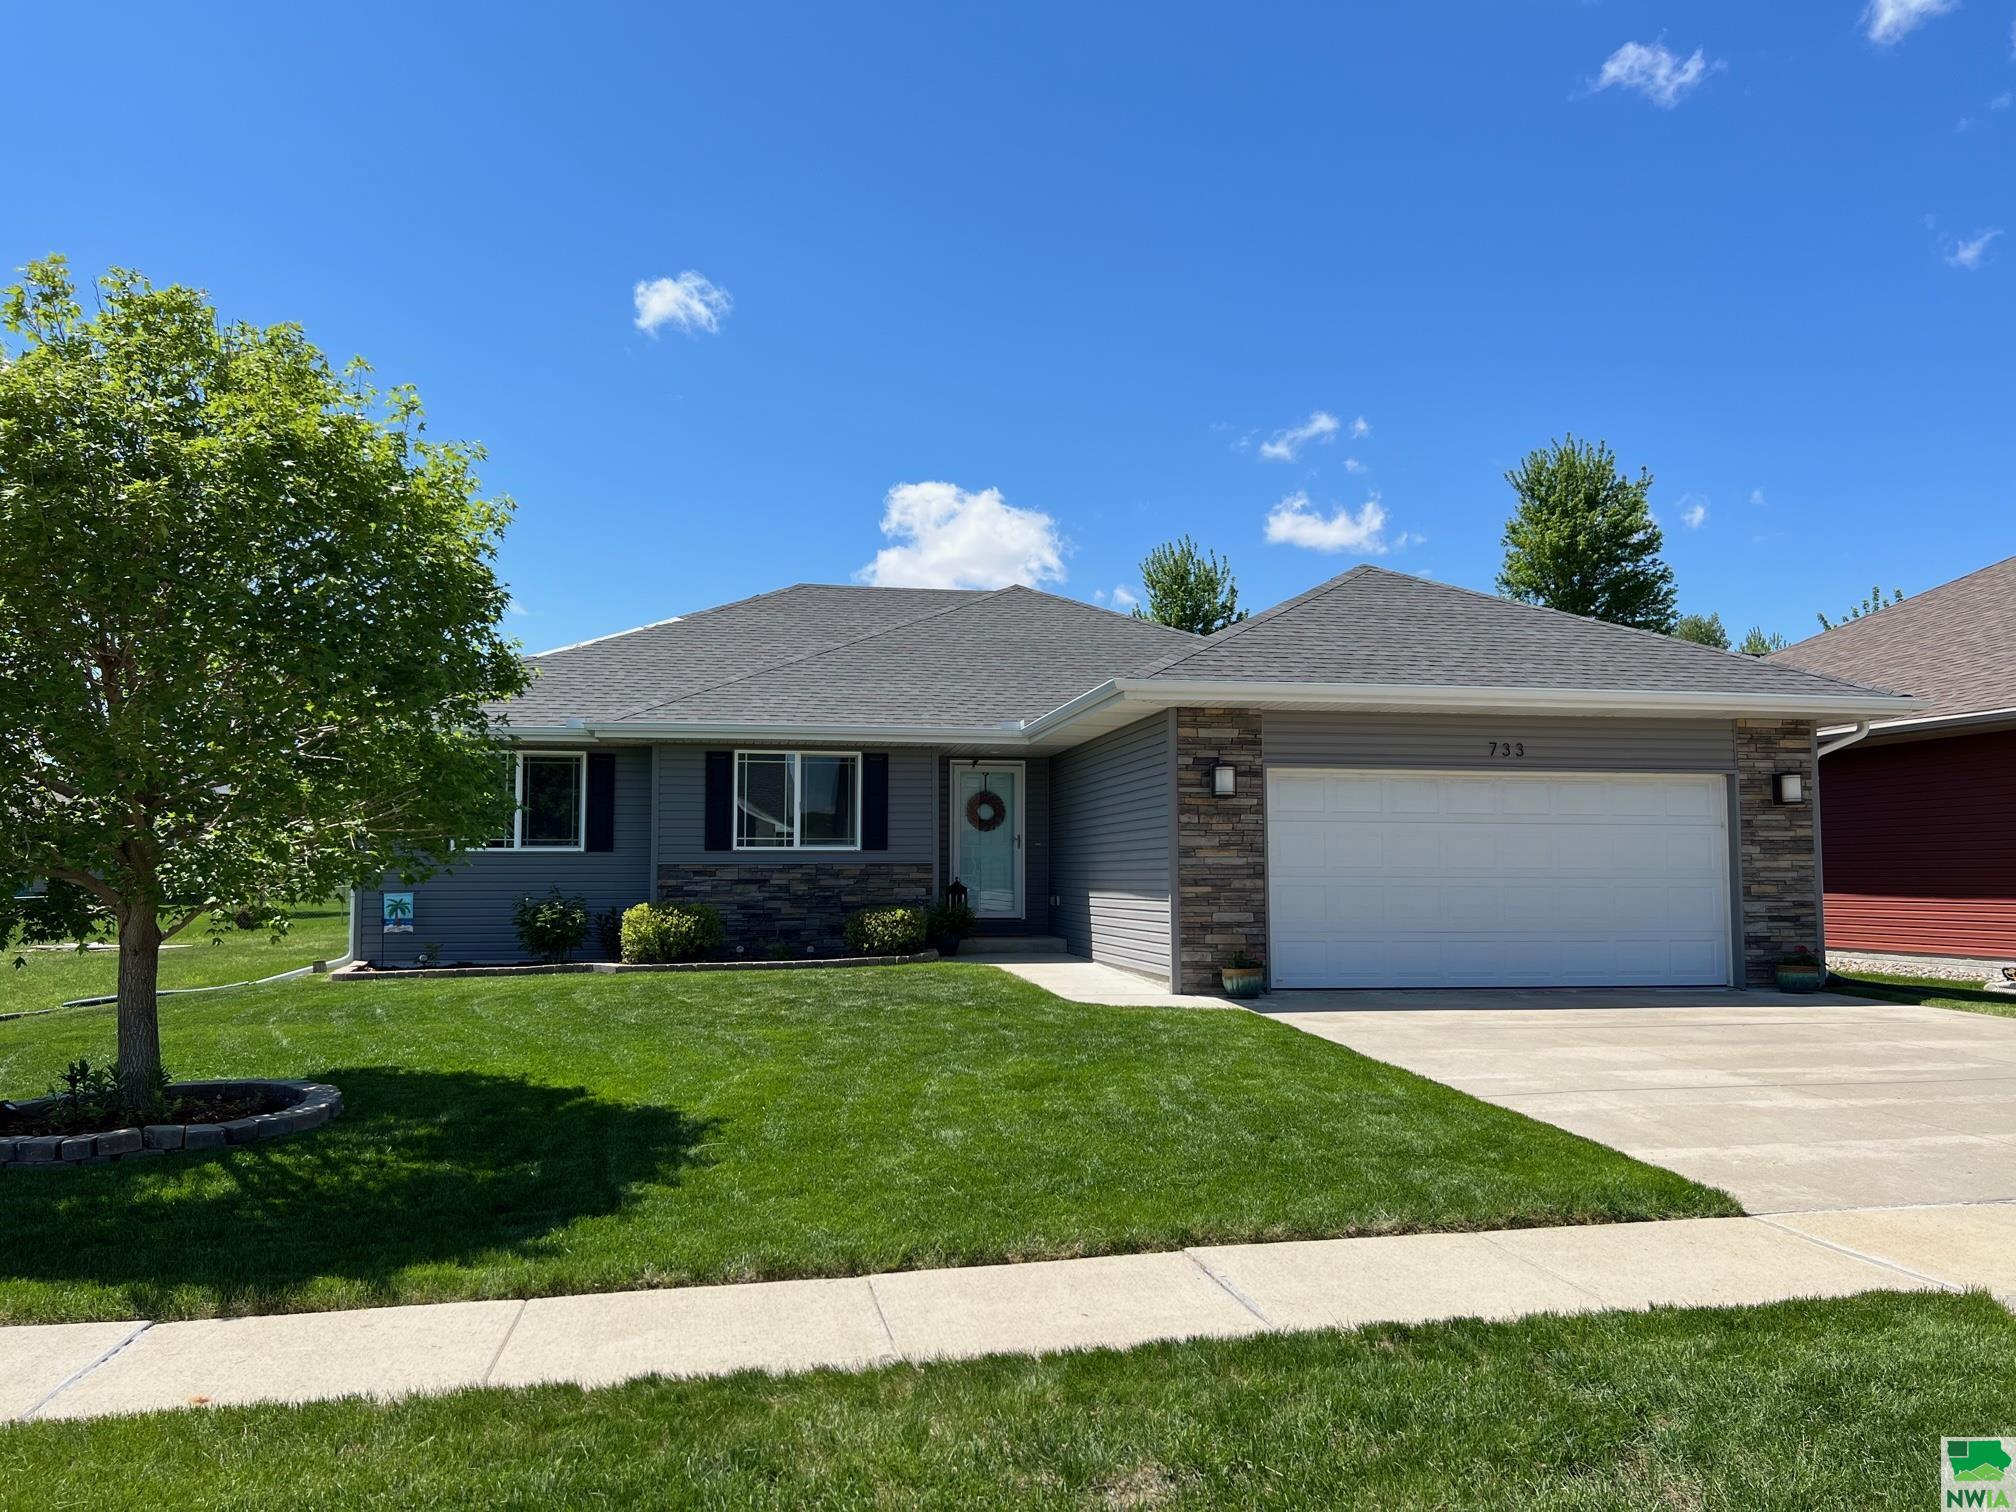 733 Brentwood St, Sioux City, Iowa 51103 